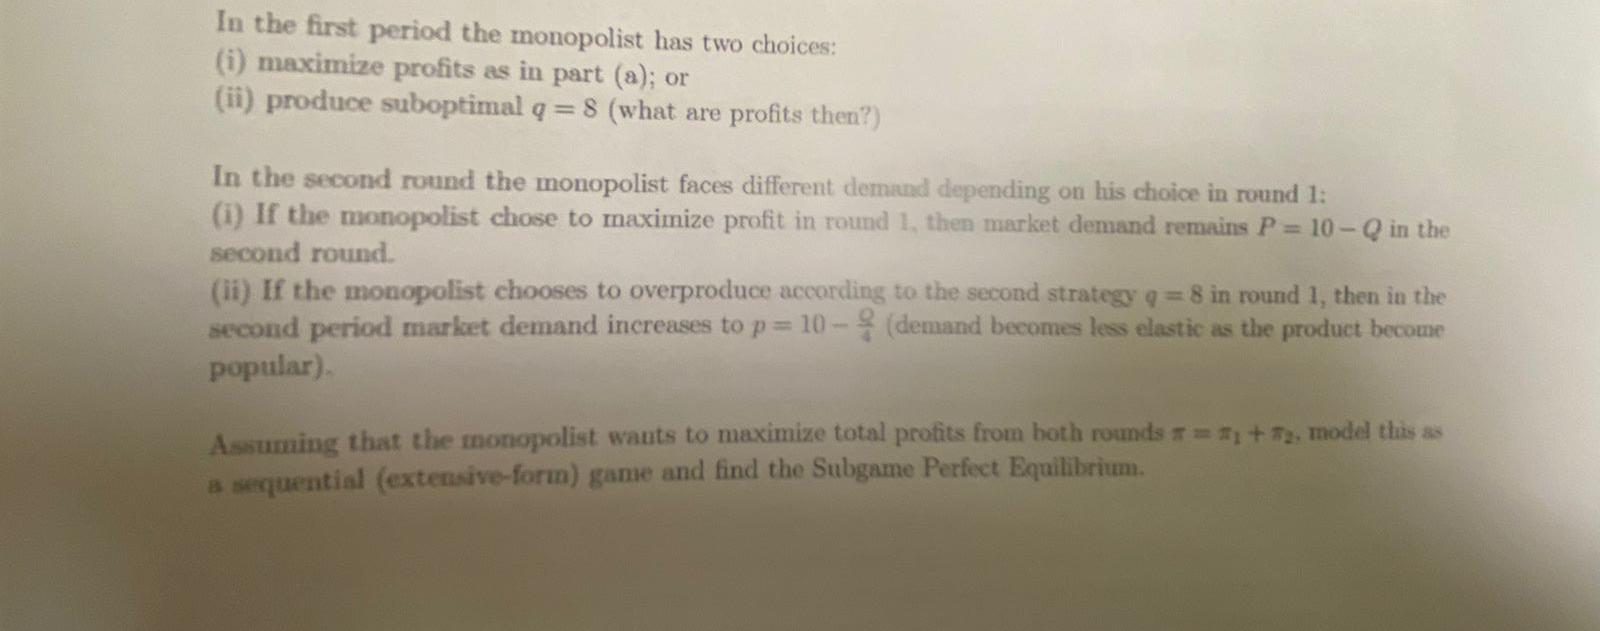 In the first period the monopolist has two choices: (i) maximize profits as in part (a); or (ii) produce